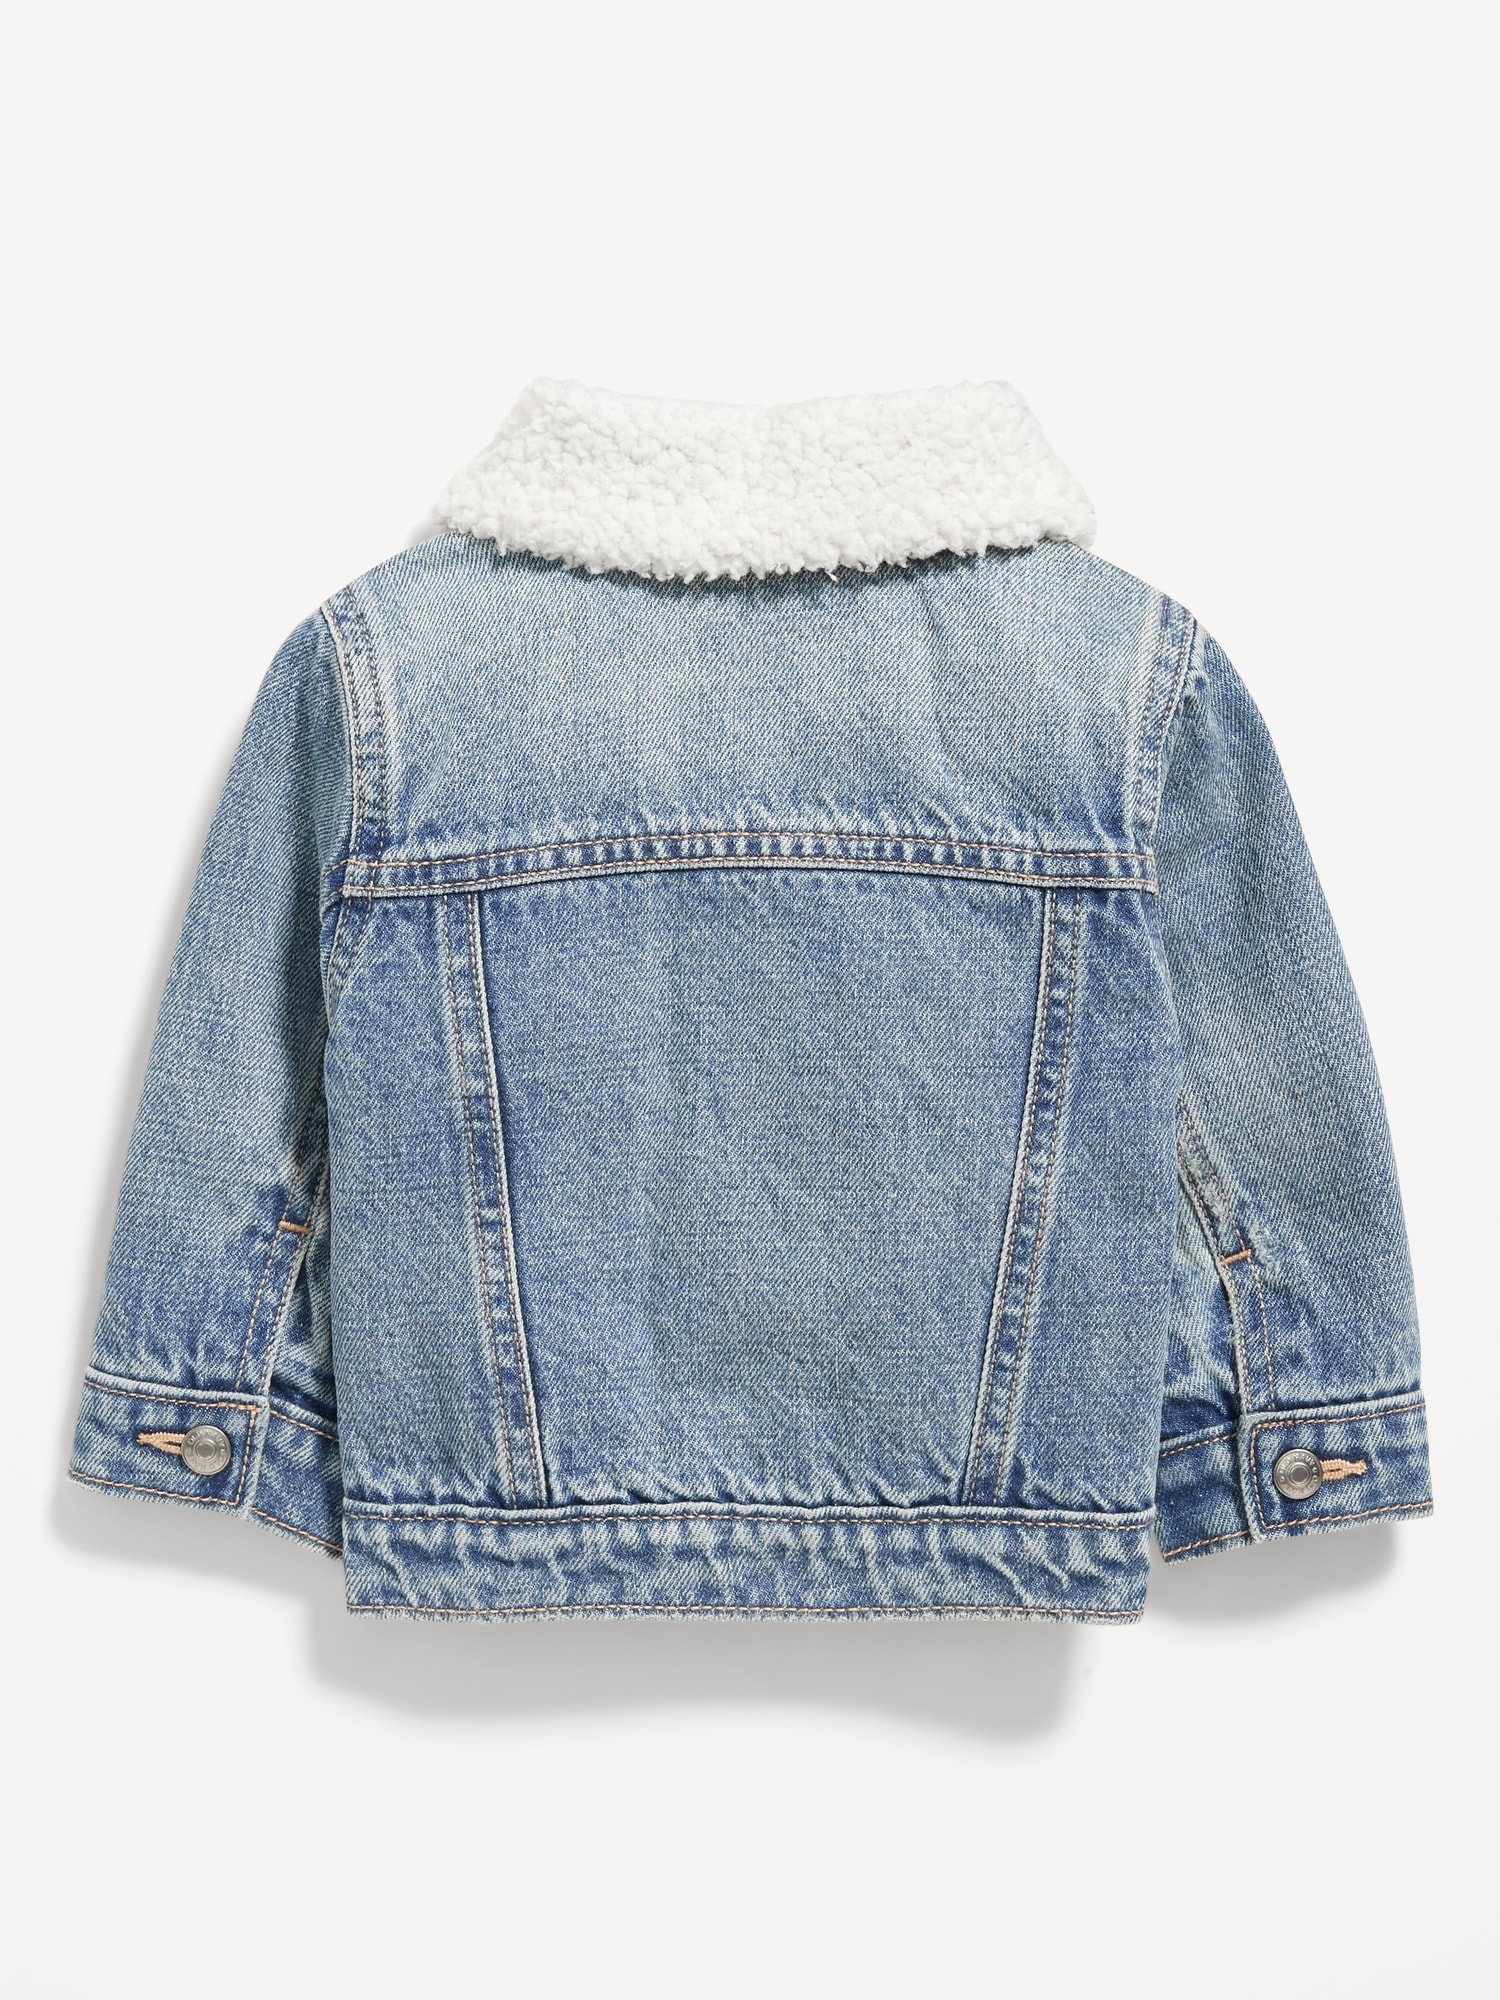 Unisex Sherpa-Collar Cozy-Lined Jean Jacket for Baby